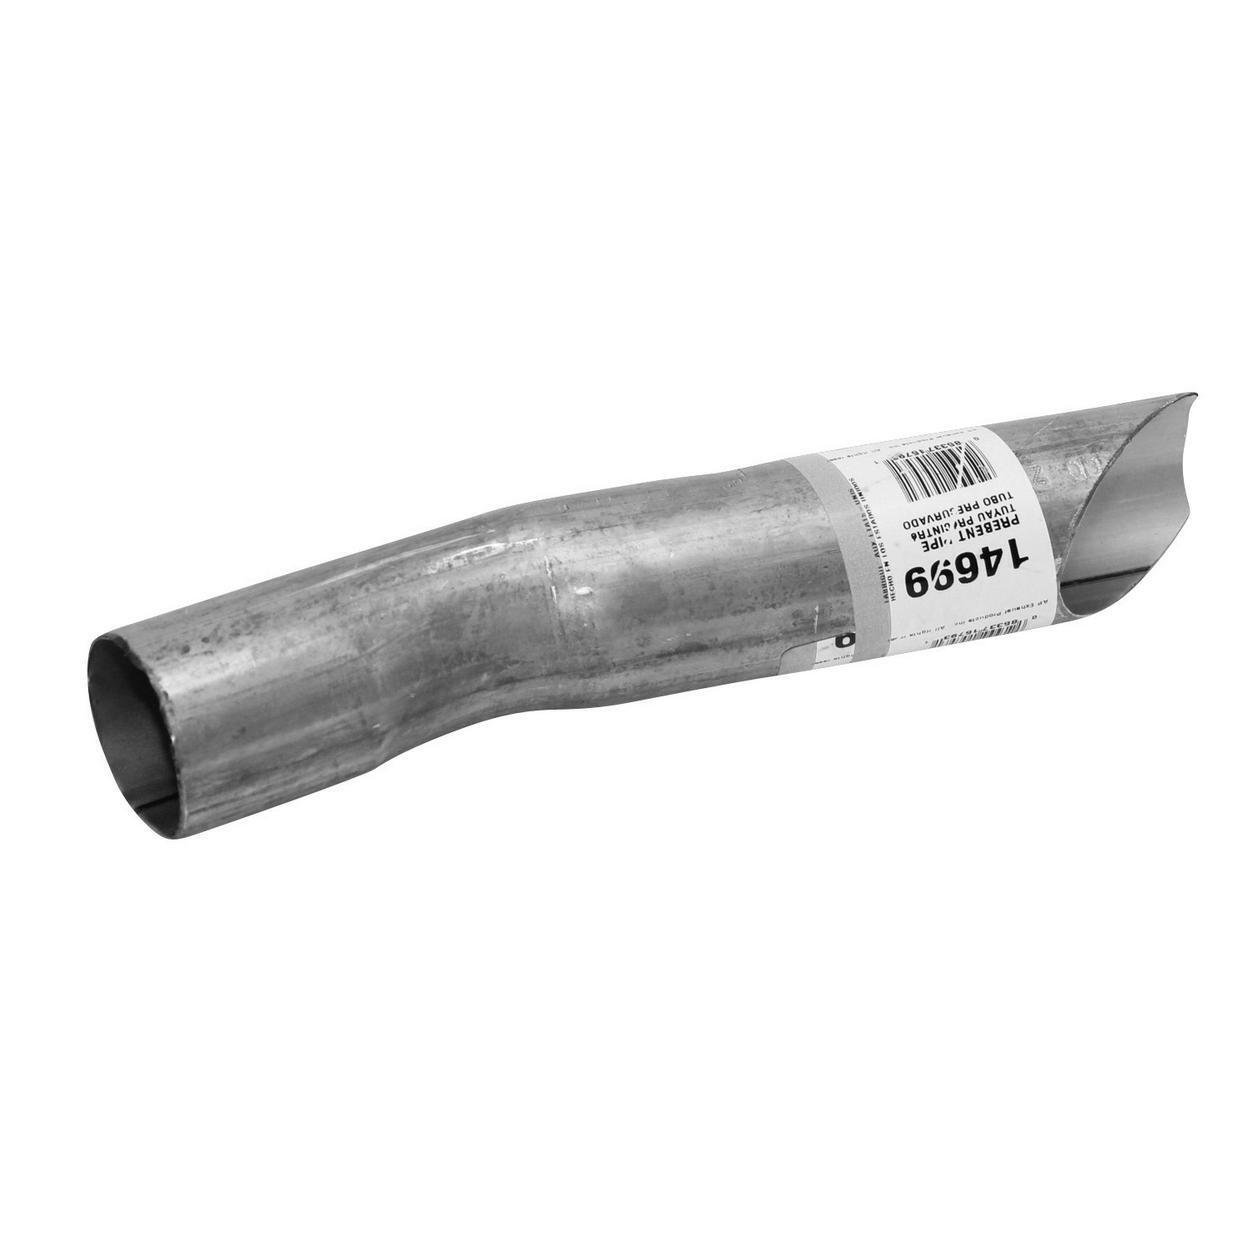 14699-BA Exhaust Tail Pipe Fits 1993-1996 Chevrolet Corsica 2.2L L4 GAS OHV